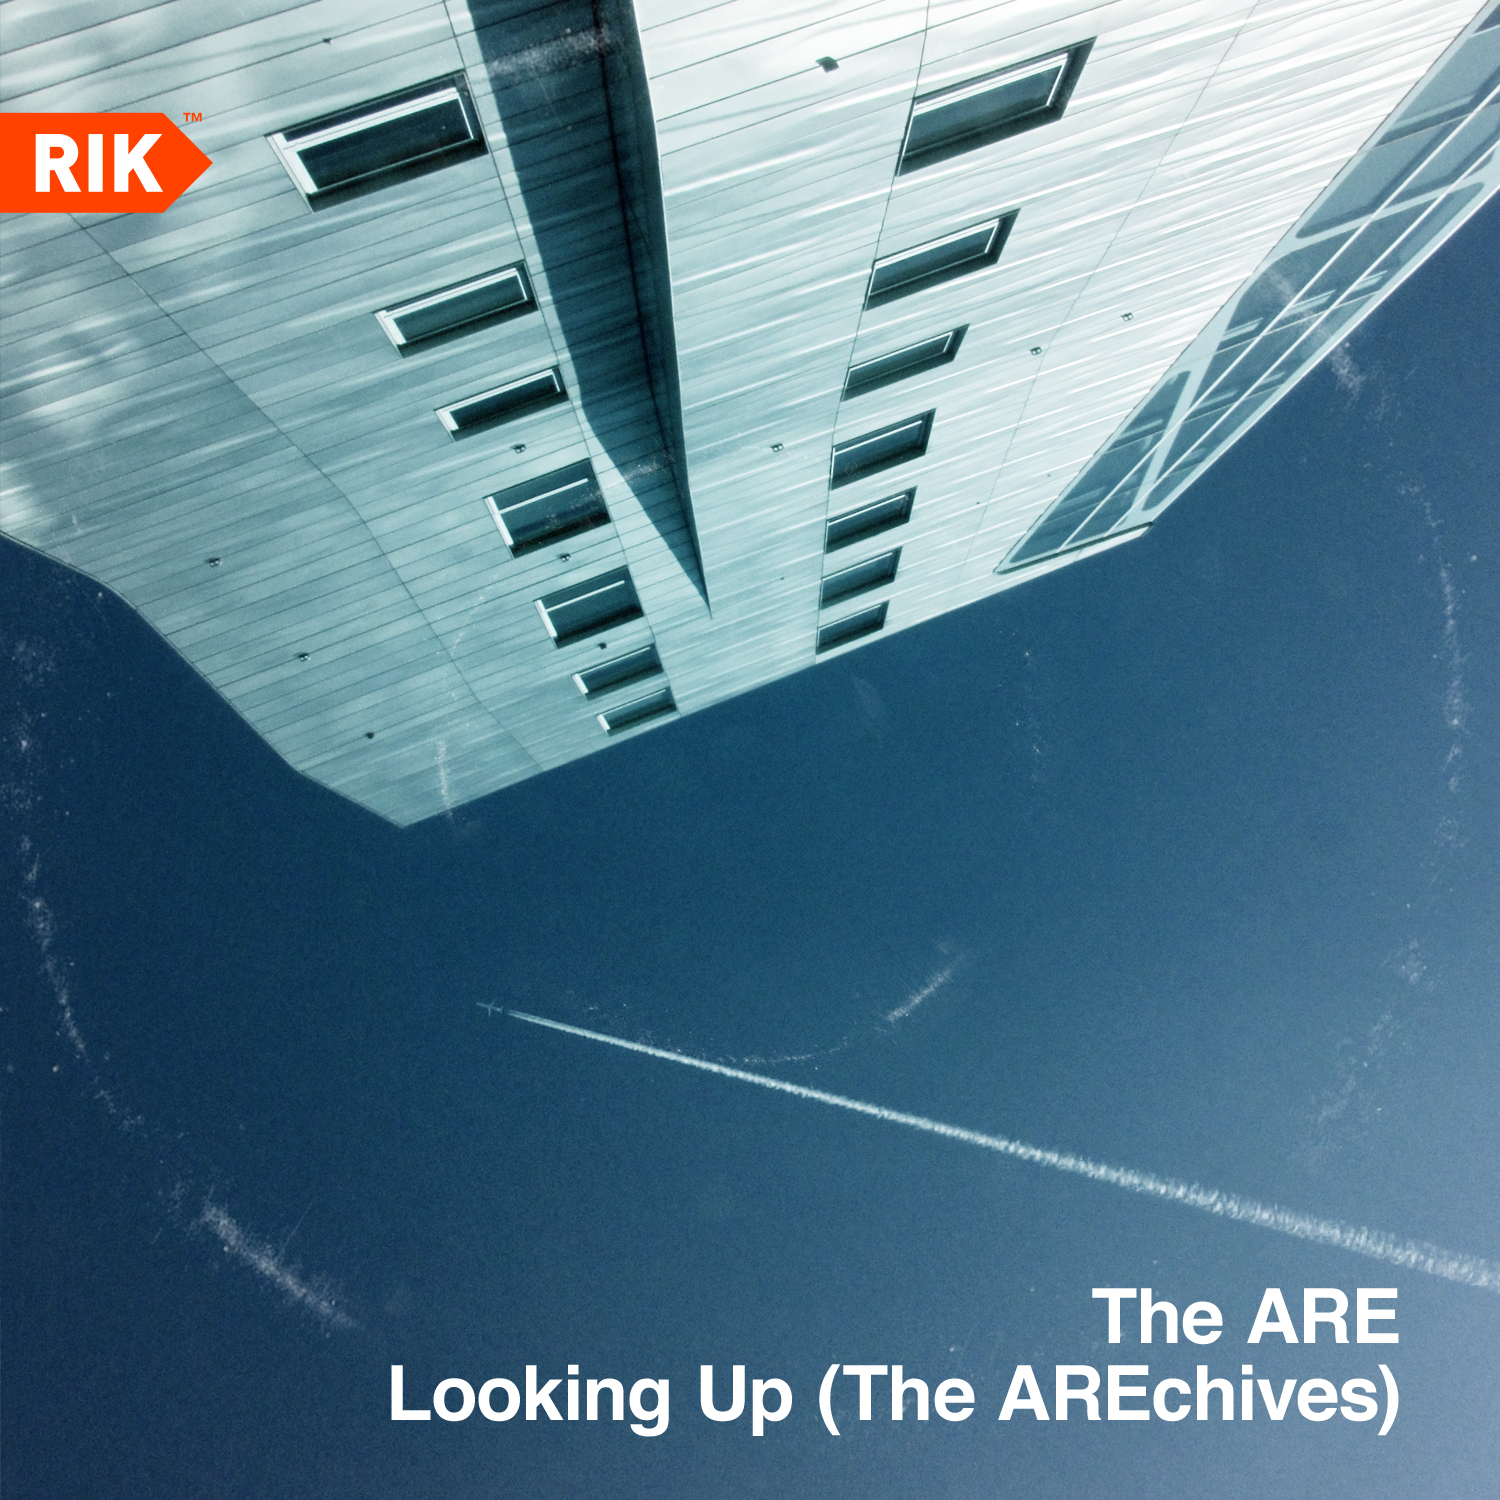 The ARE — Looking Up (The AREchives)